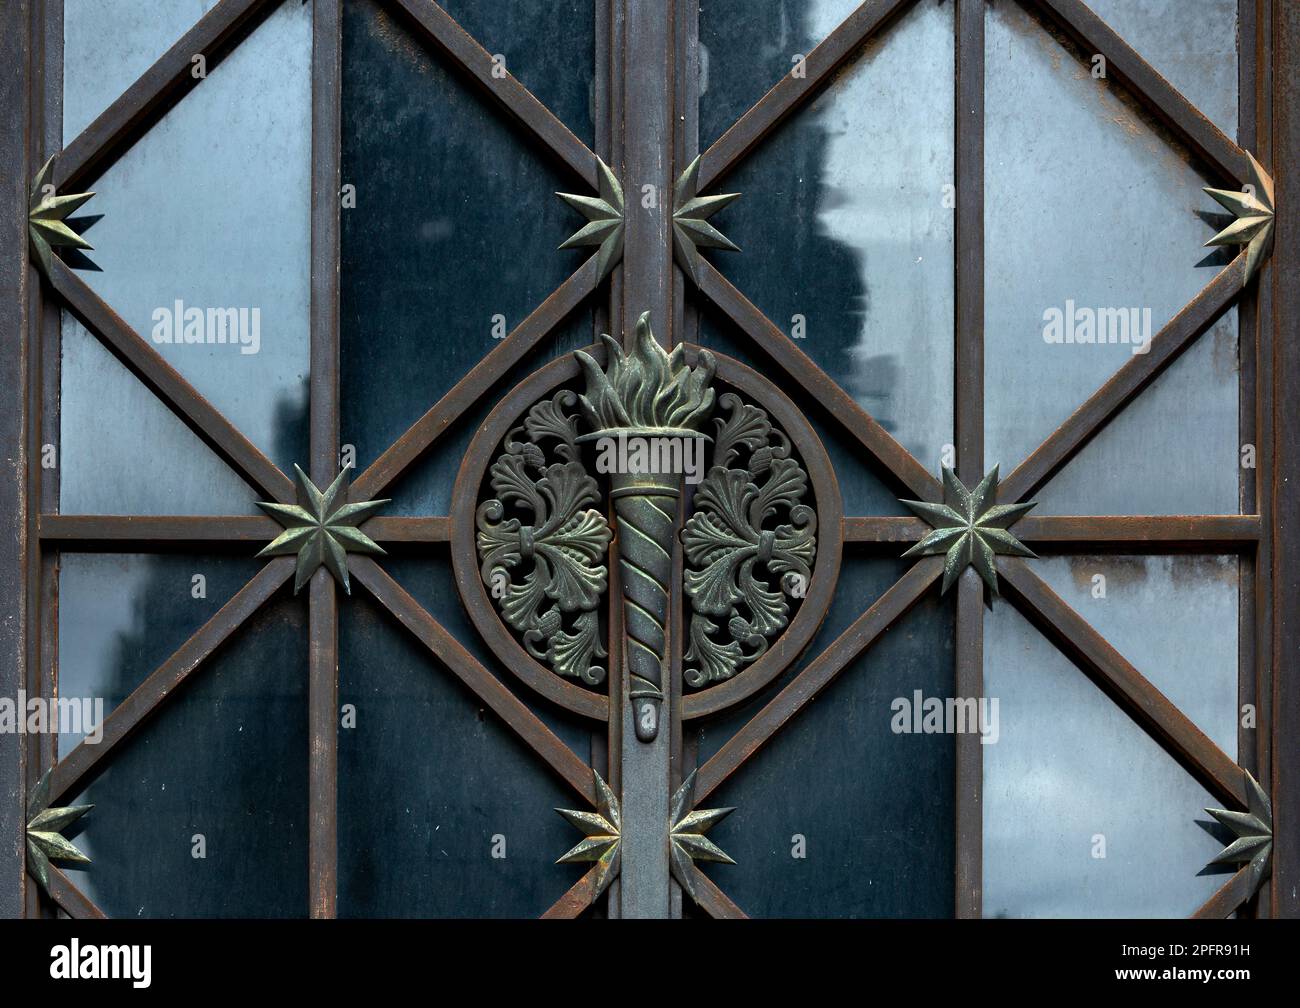 Shot in black and white and color detail on the facade of this historic building representing some character, animal or flower. Set at Barcelona Stock Photo